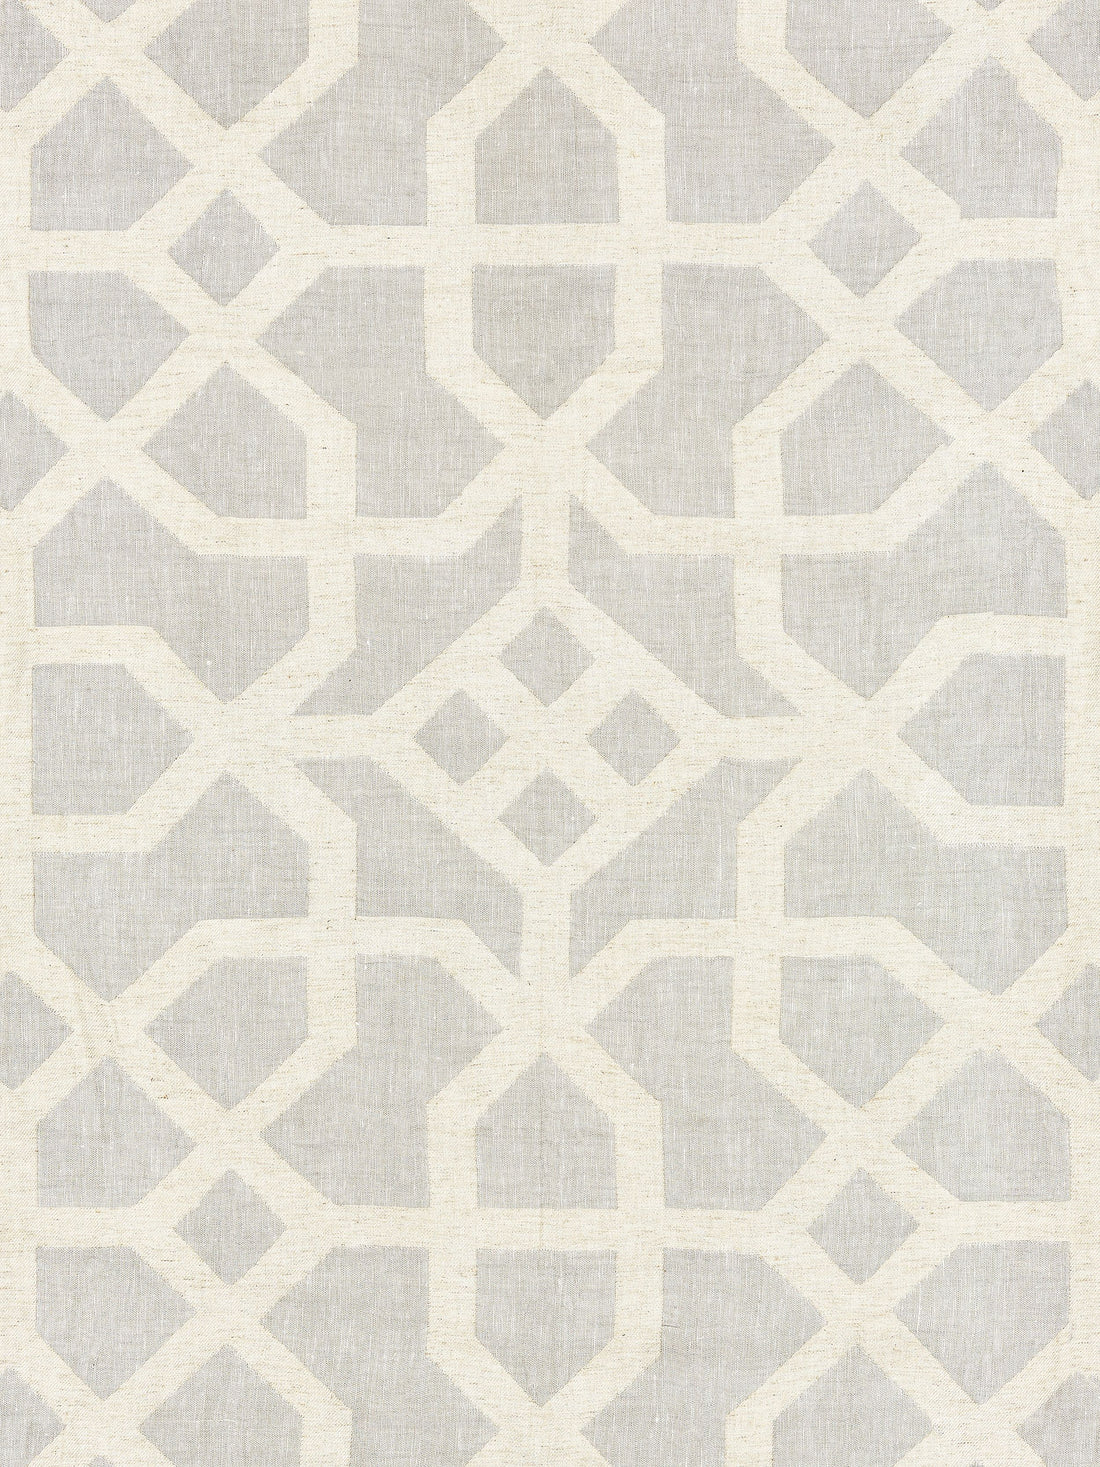 Linen Lattice fabric in nickel and greige color - pattern number SC 000327149 - by Scalamandre in the Scalamandre Fabrics Book 1 collection